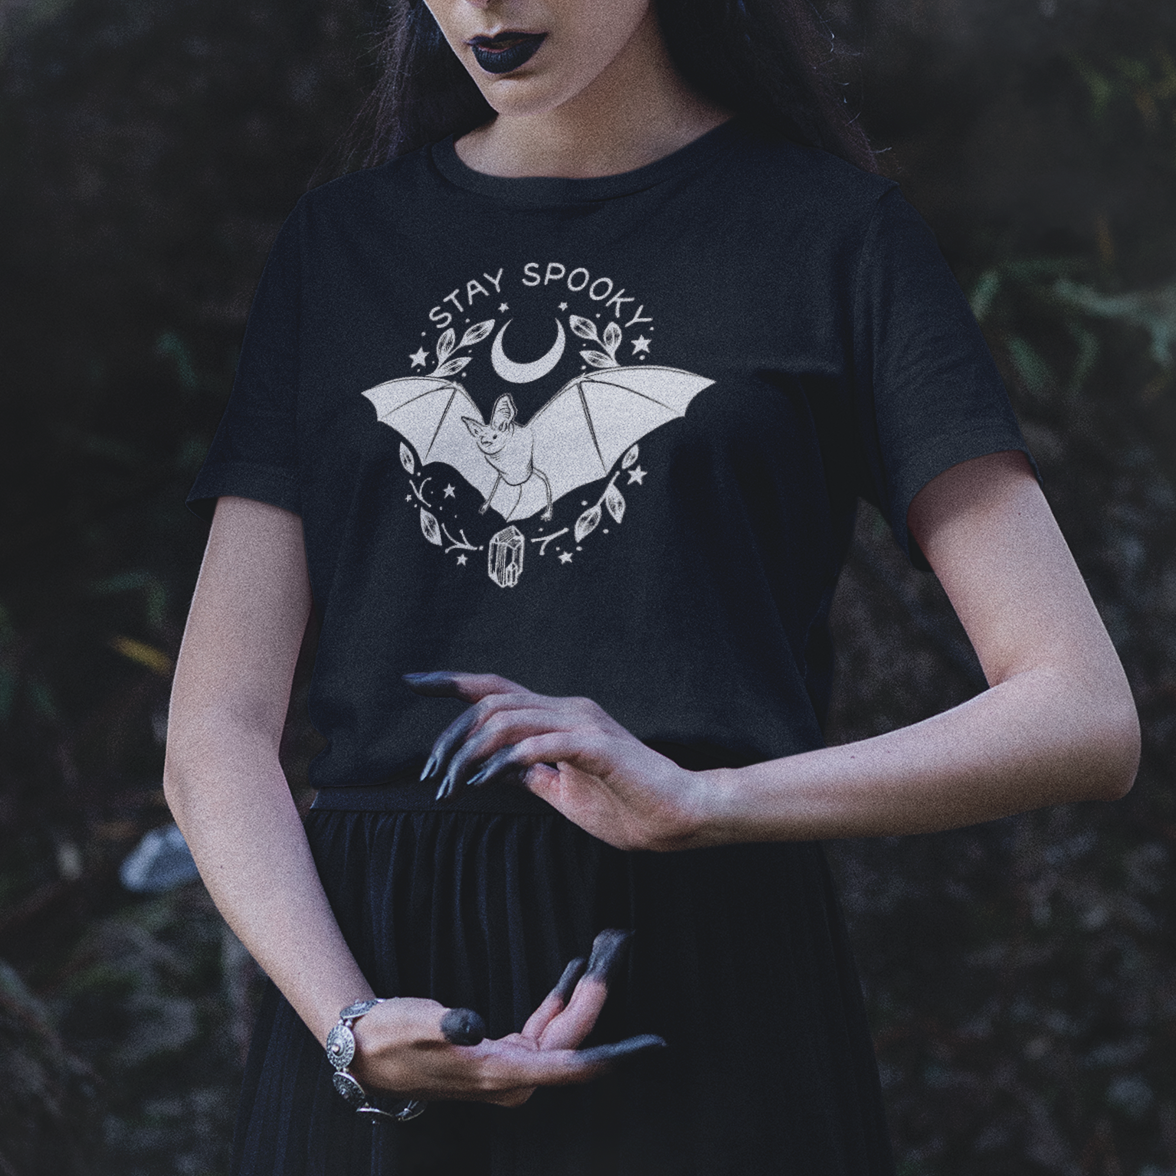 Revamped Bat Stay Spooky Graphic Shirt